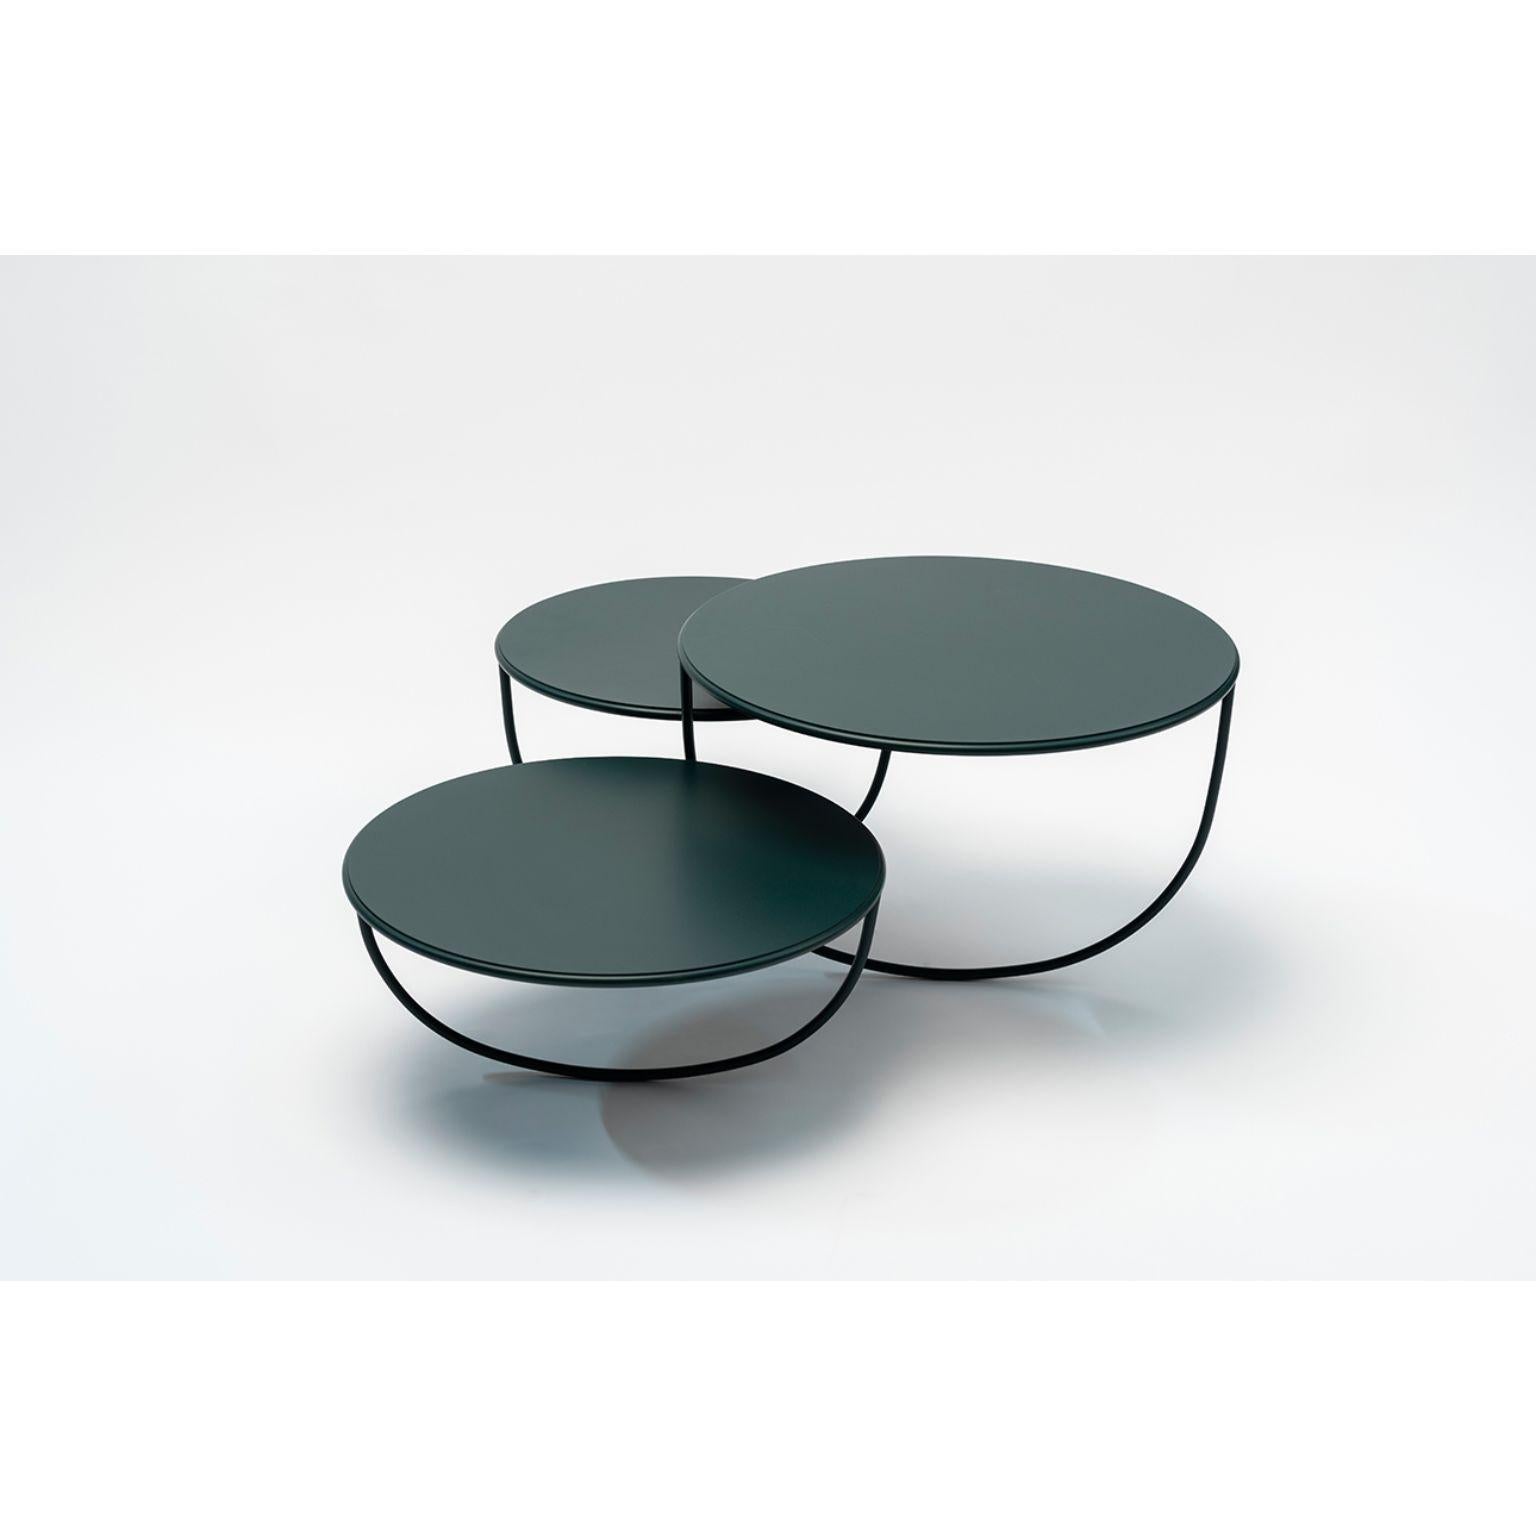 Trio side table by Nendo
Materials: top: Noce Canaletto solid wood, glass or metal
 Structure: Black chrome metal, Black/Light grey NCS 2002 Y50R/Coral NCS 2570 Y70R /Dark 
 Green NCS 8010 B70G powder-coated metal
Dimensions: W 84.7 x D 76.3 x H